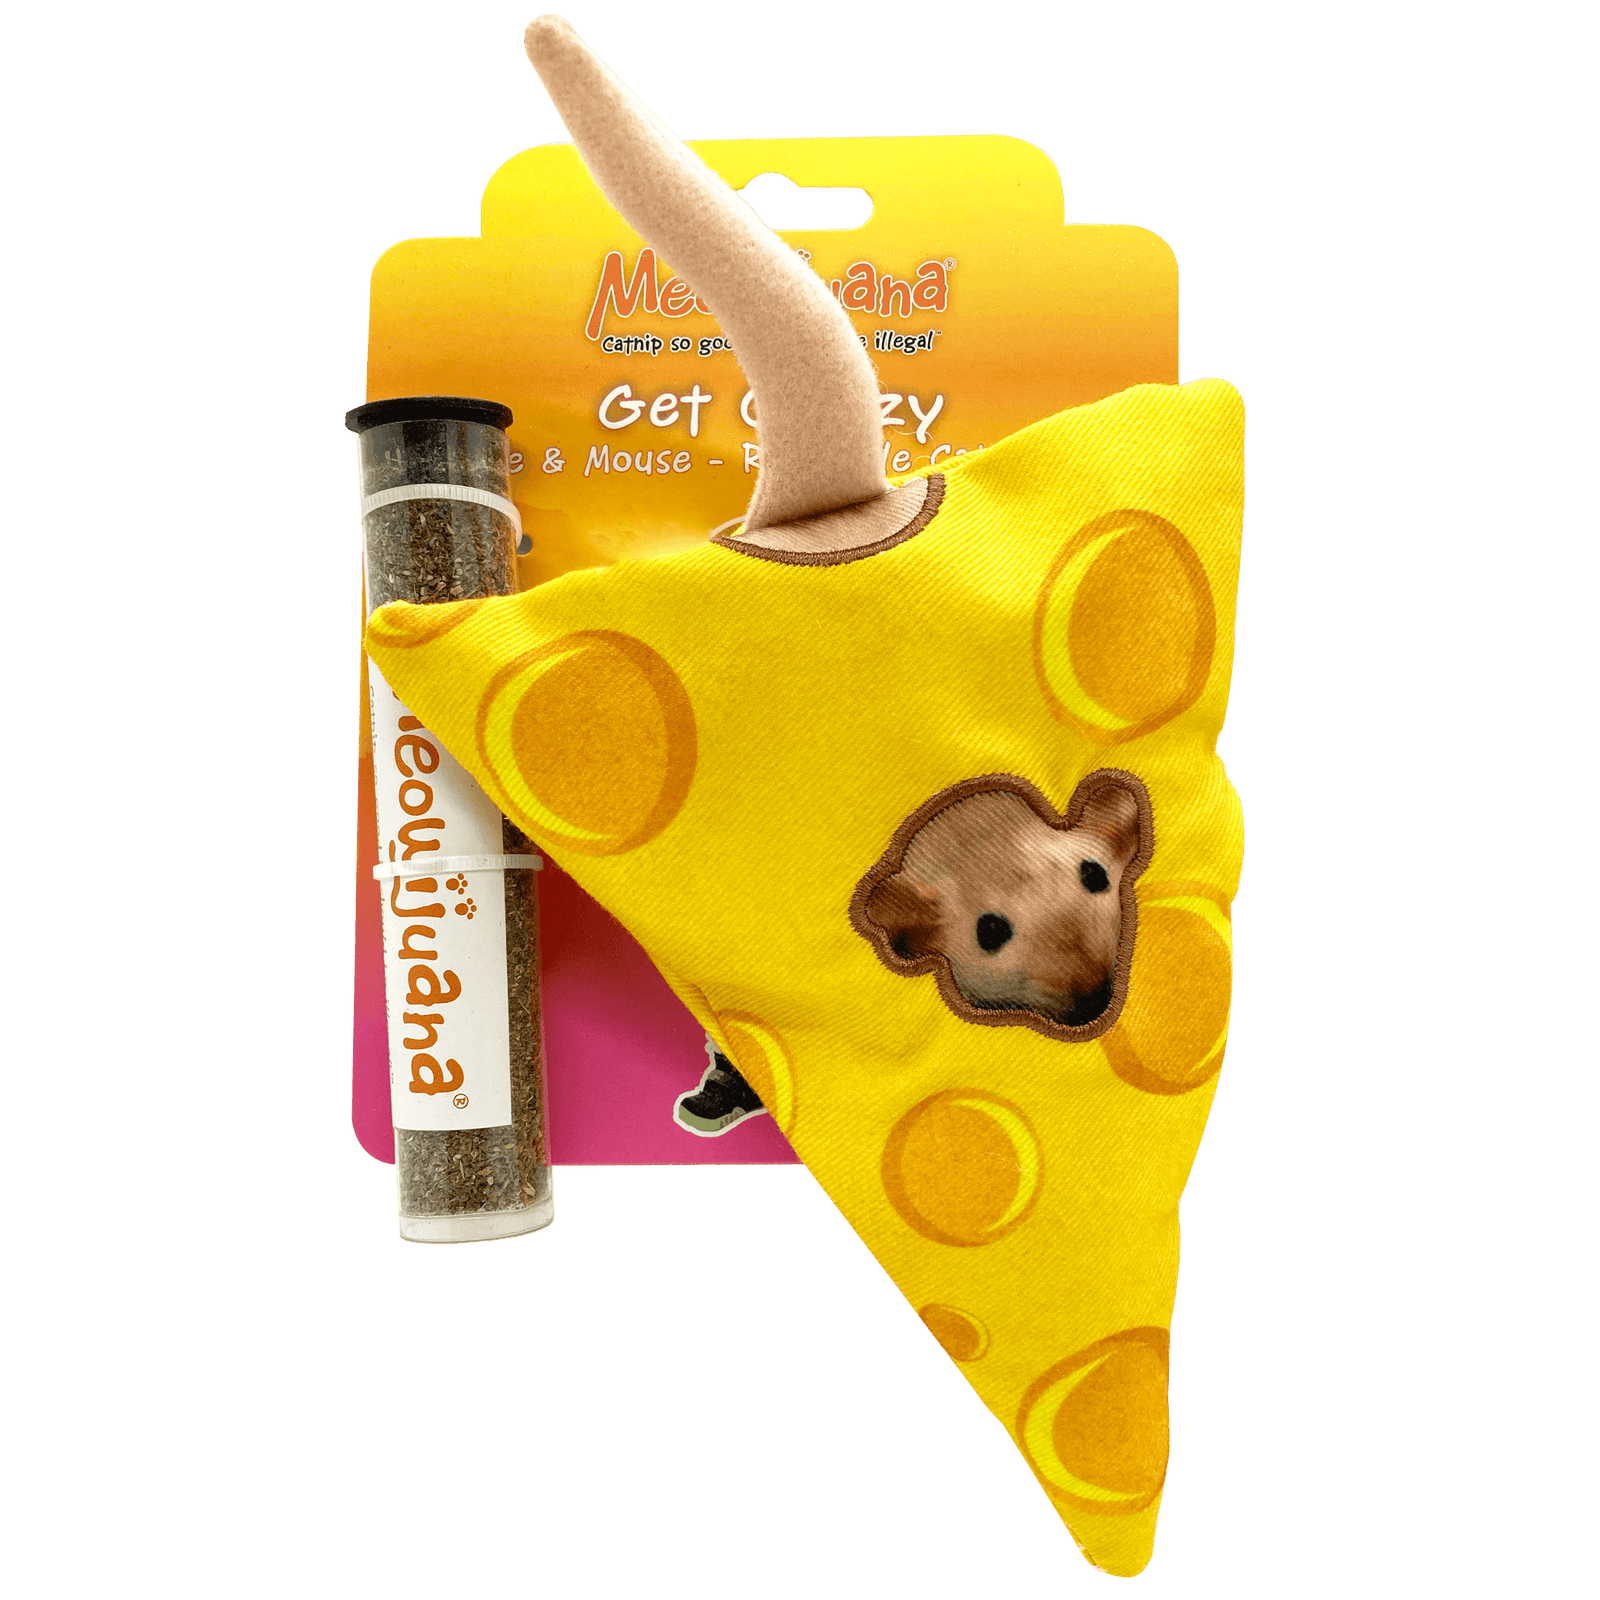 Meowijuana Get Cheezy! Cheese & Mouse Cat Toy with Refillable Catnip